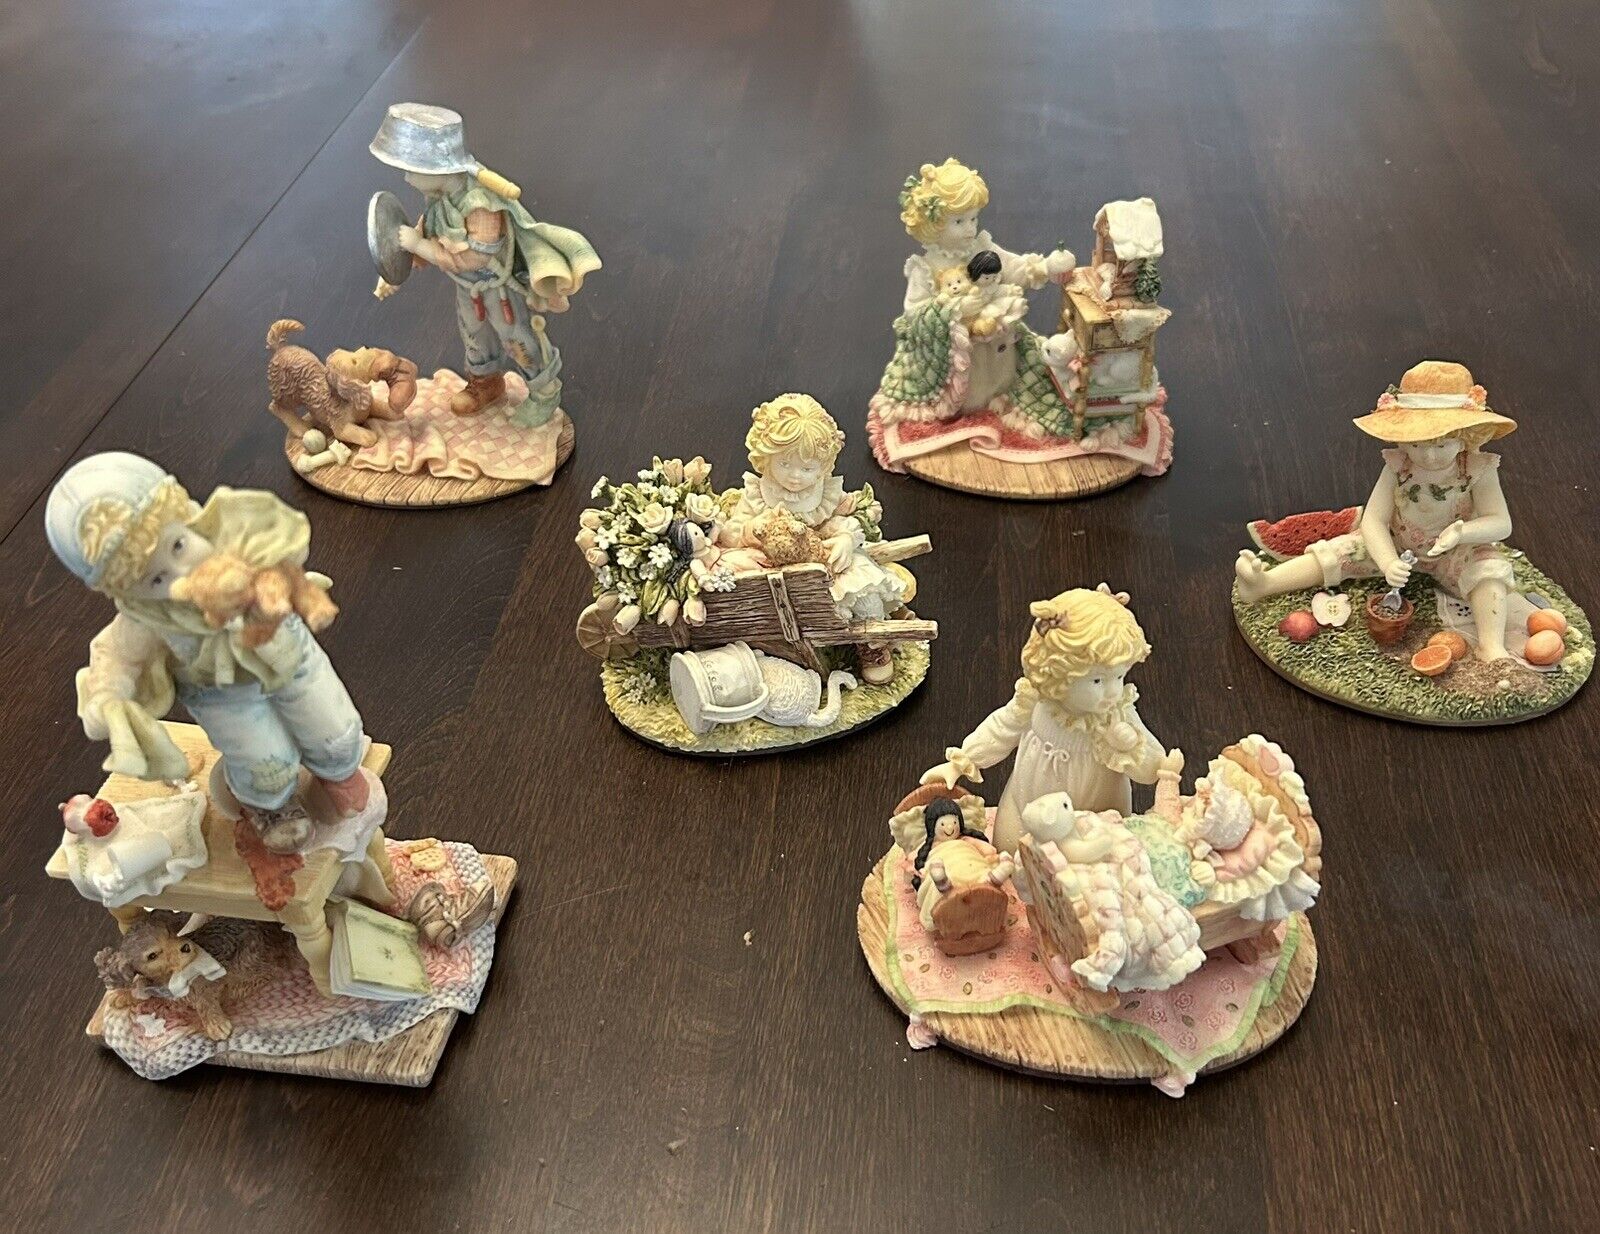 Rare- “Laura’s Attic” Limited Edition Figurine by Karen Hahn 1992/1993 set of 6.